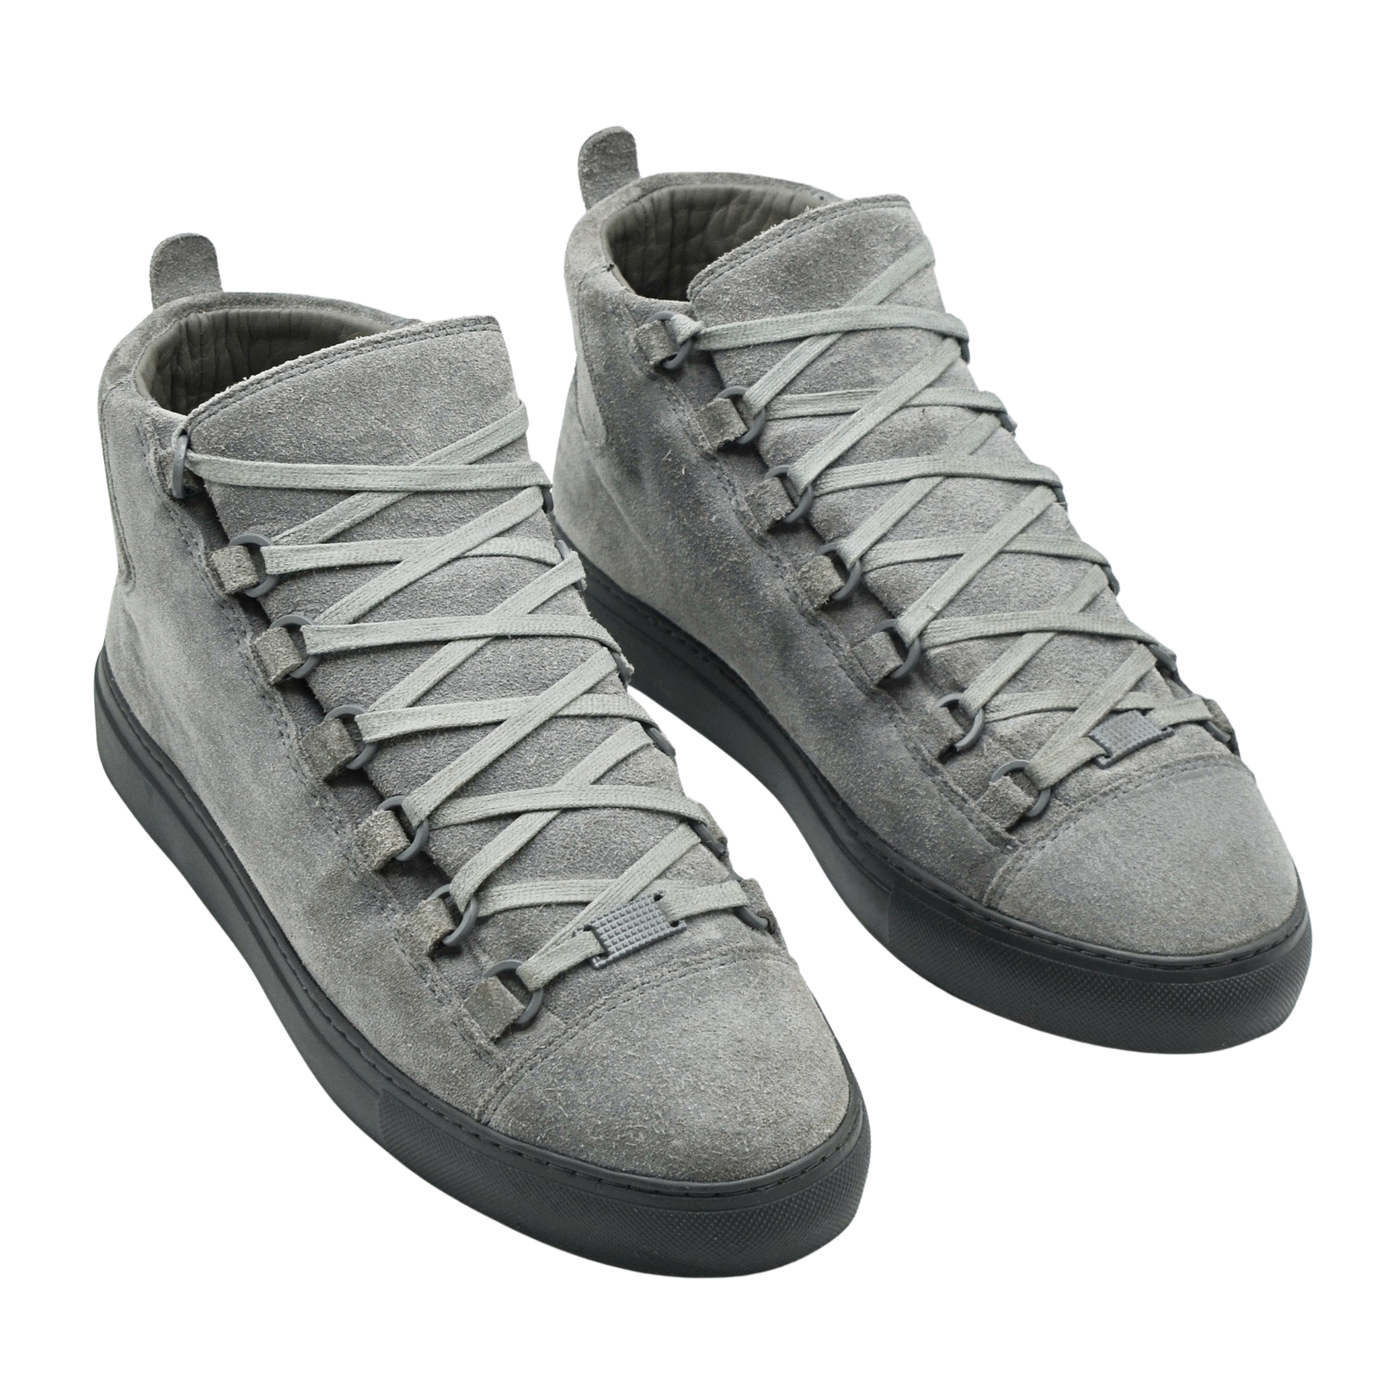 Balenciaga Arena Glossed Suede High Top Grey  Where To Buy  509570  The  Sole Supplier